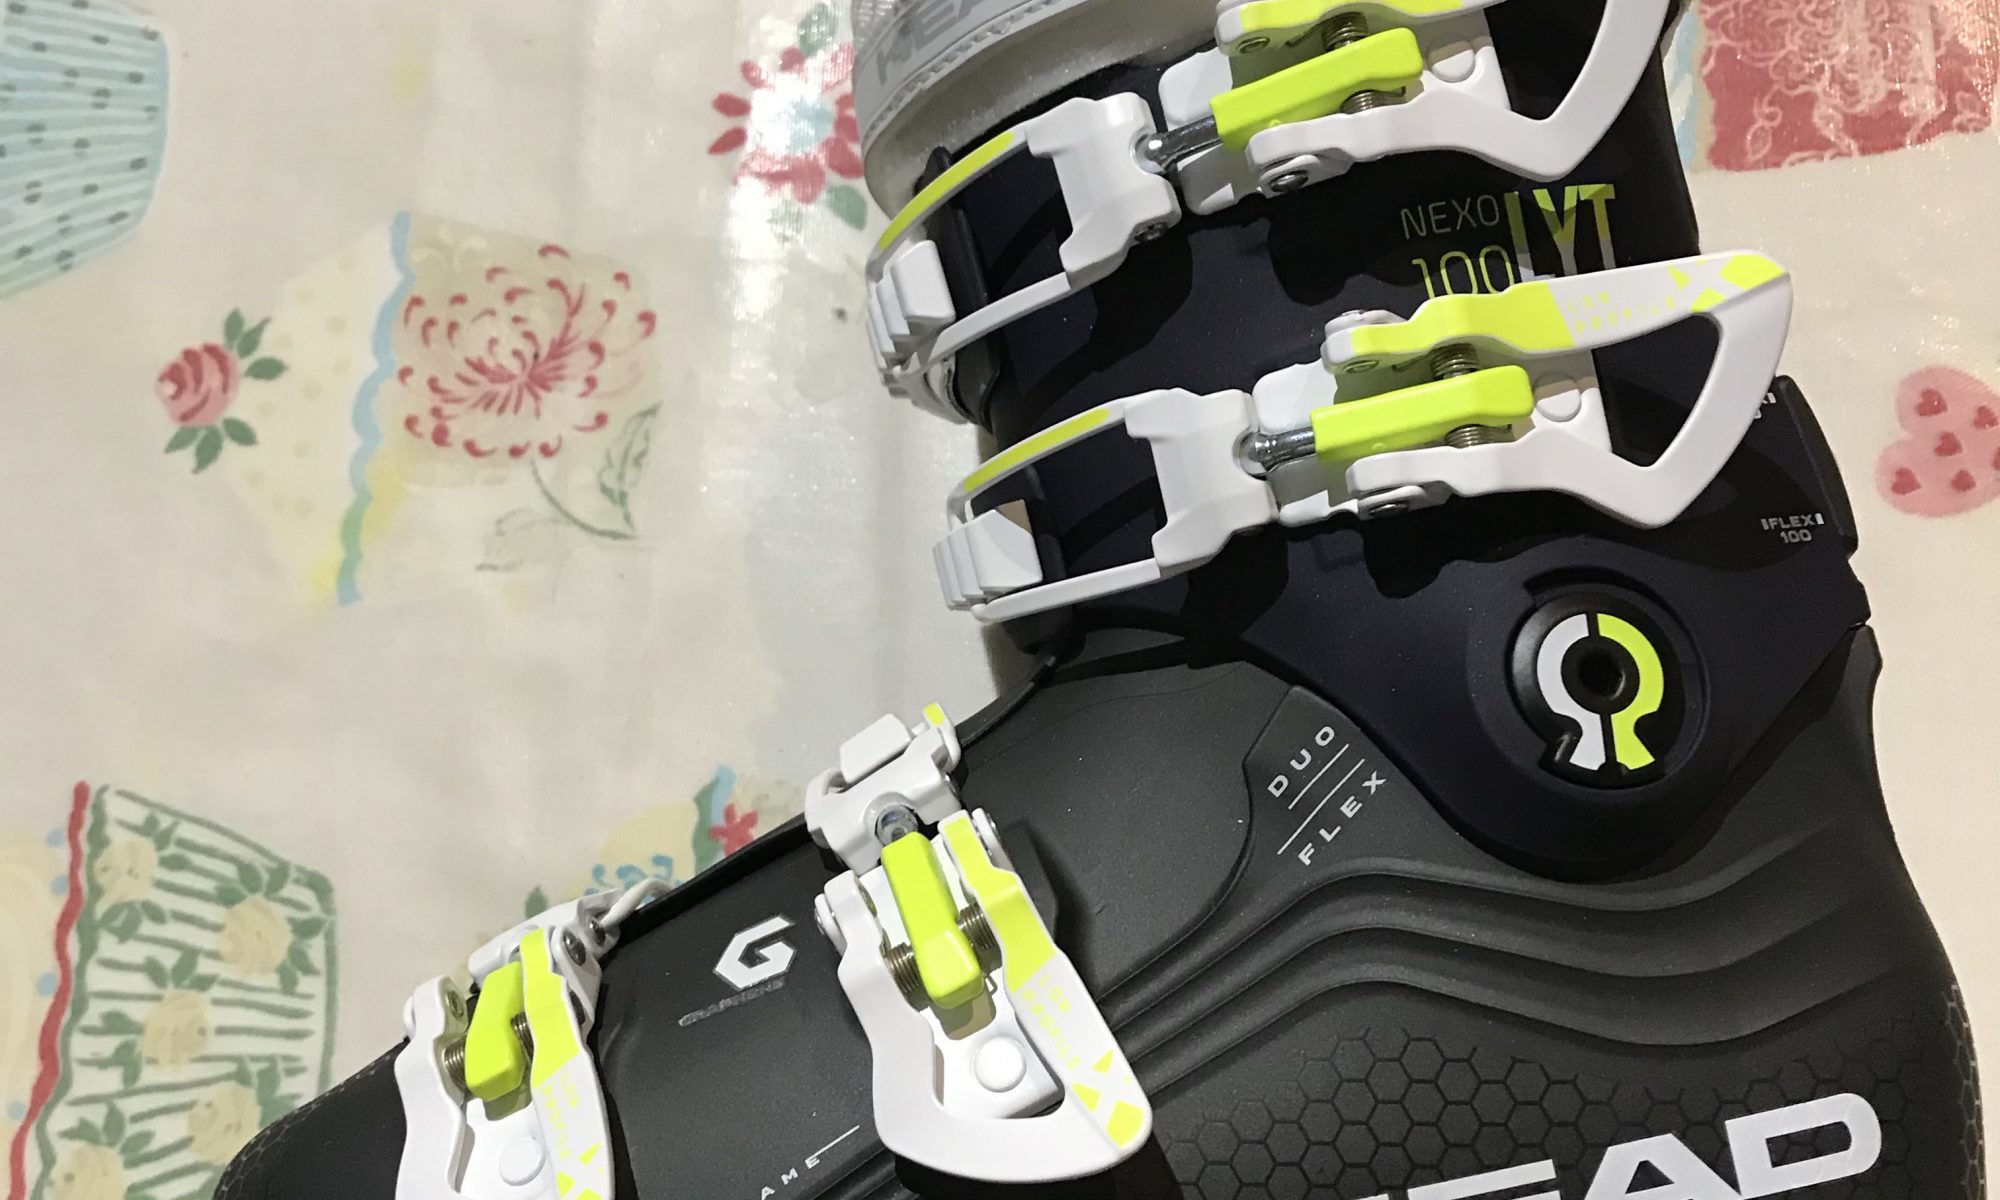 Review on the Head Nexo Lyt 100 W G Ski Boots 2019